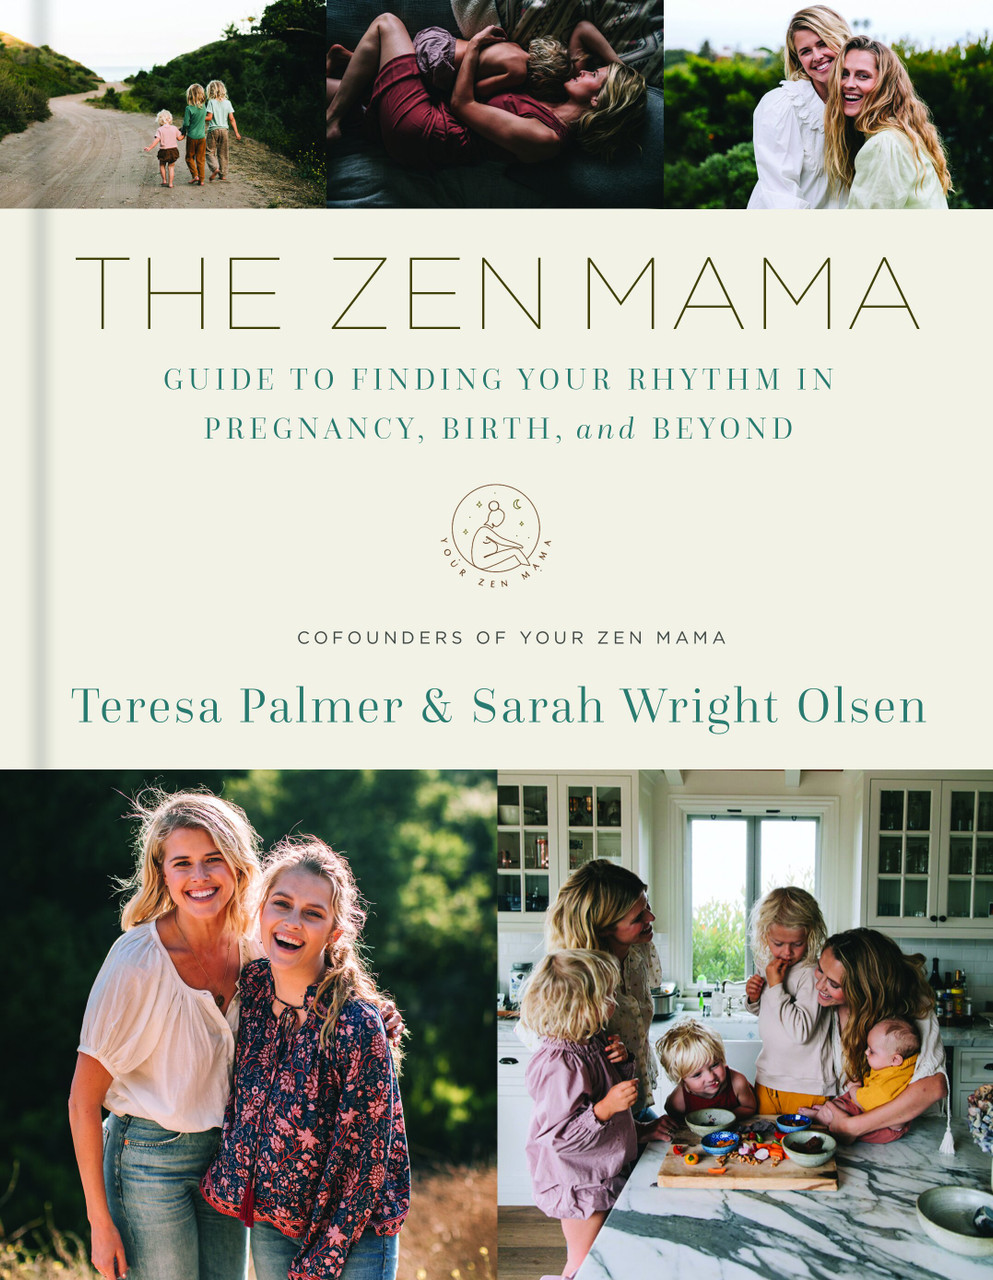 The Zen Mama Guide to Finding Your Rhythm in Pregnancy, Birth, and Beyond by Teresa Palmer and Sarah Wright Olsen